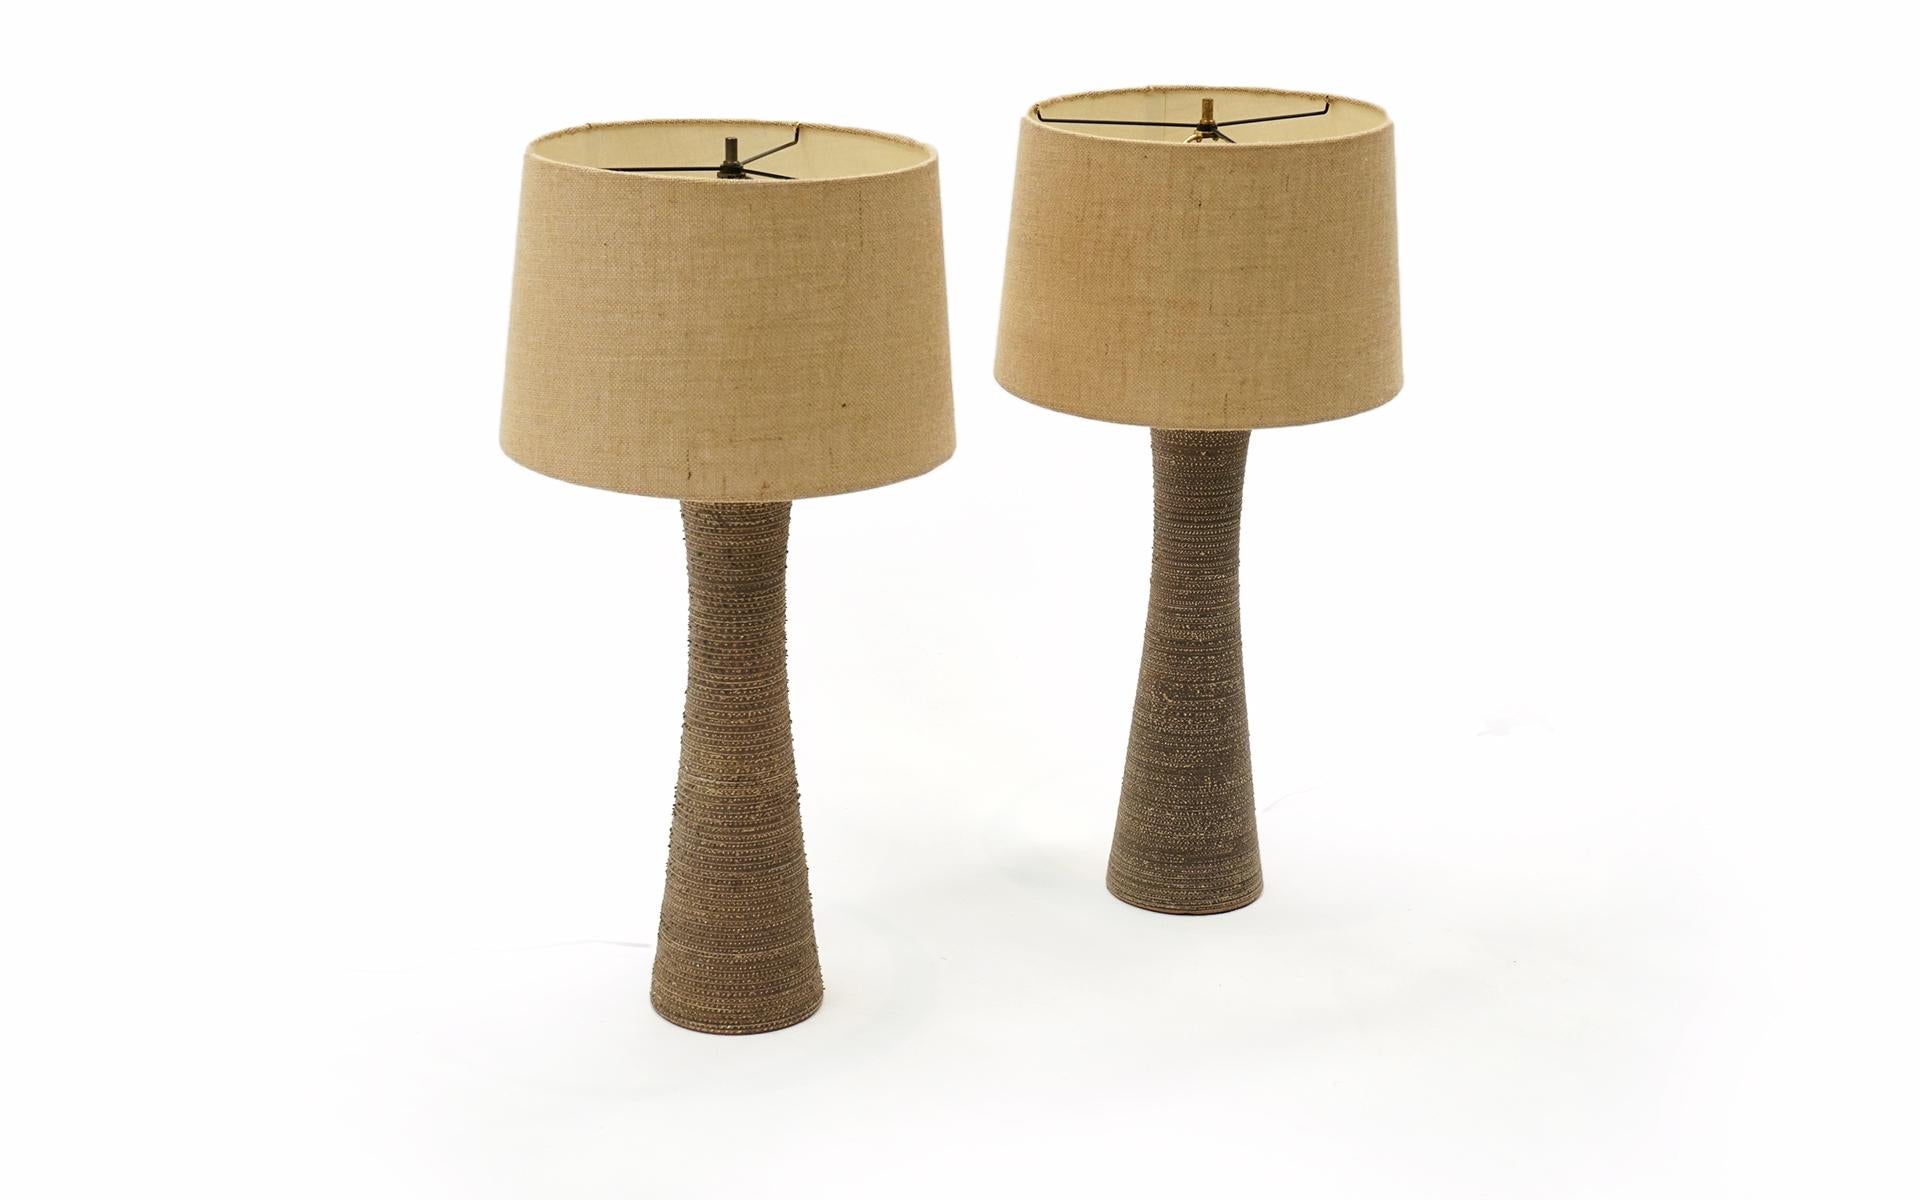 Pair of tall textured ceramic table lamps attributed to Gorden and Jane Martz for Marshall Studios. Unsigned. Very high quality materials and design. Taupe / grey / sand color. Original Shades. No chips, cracks or repairs. Working and ready to use.